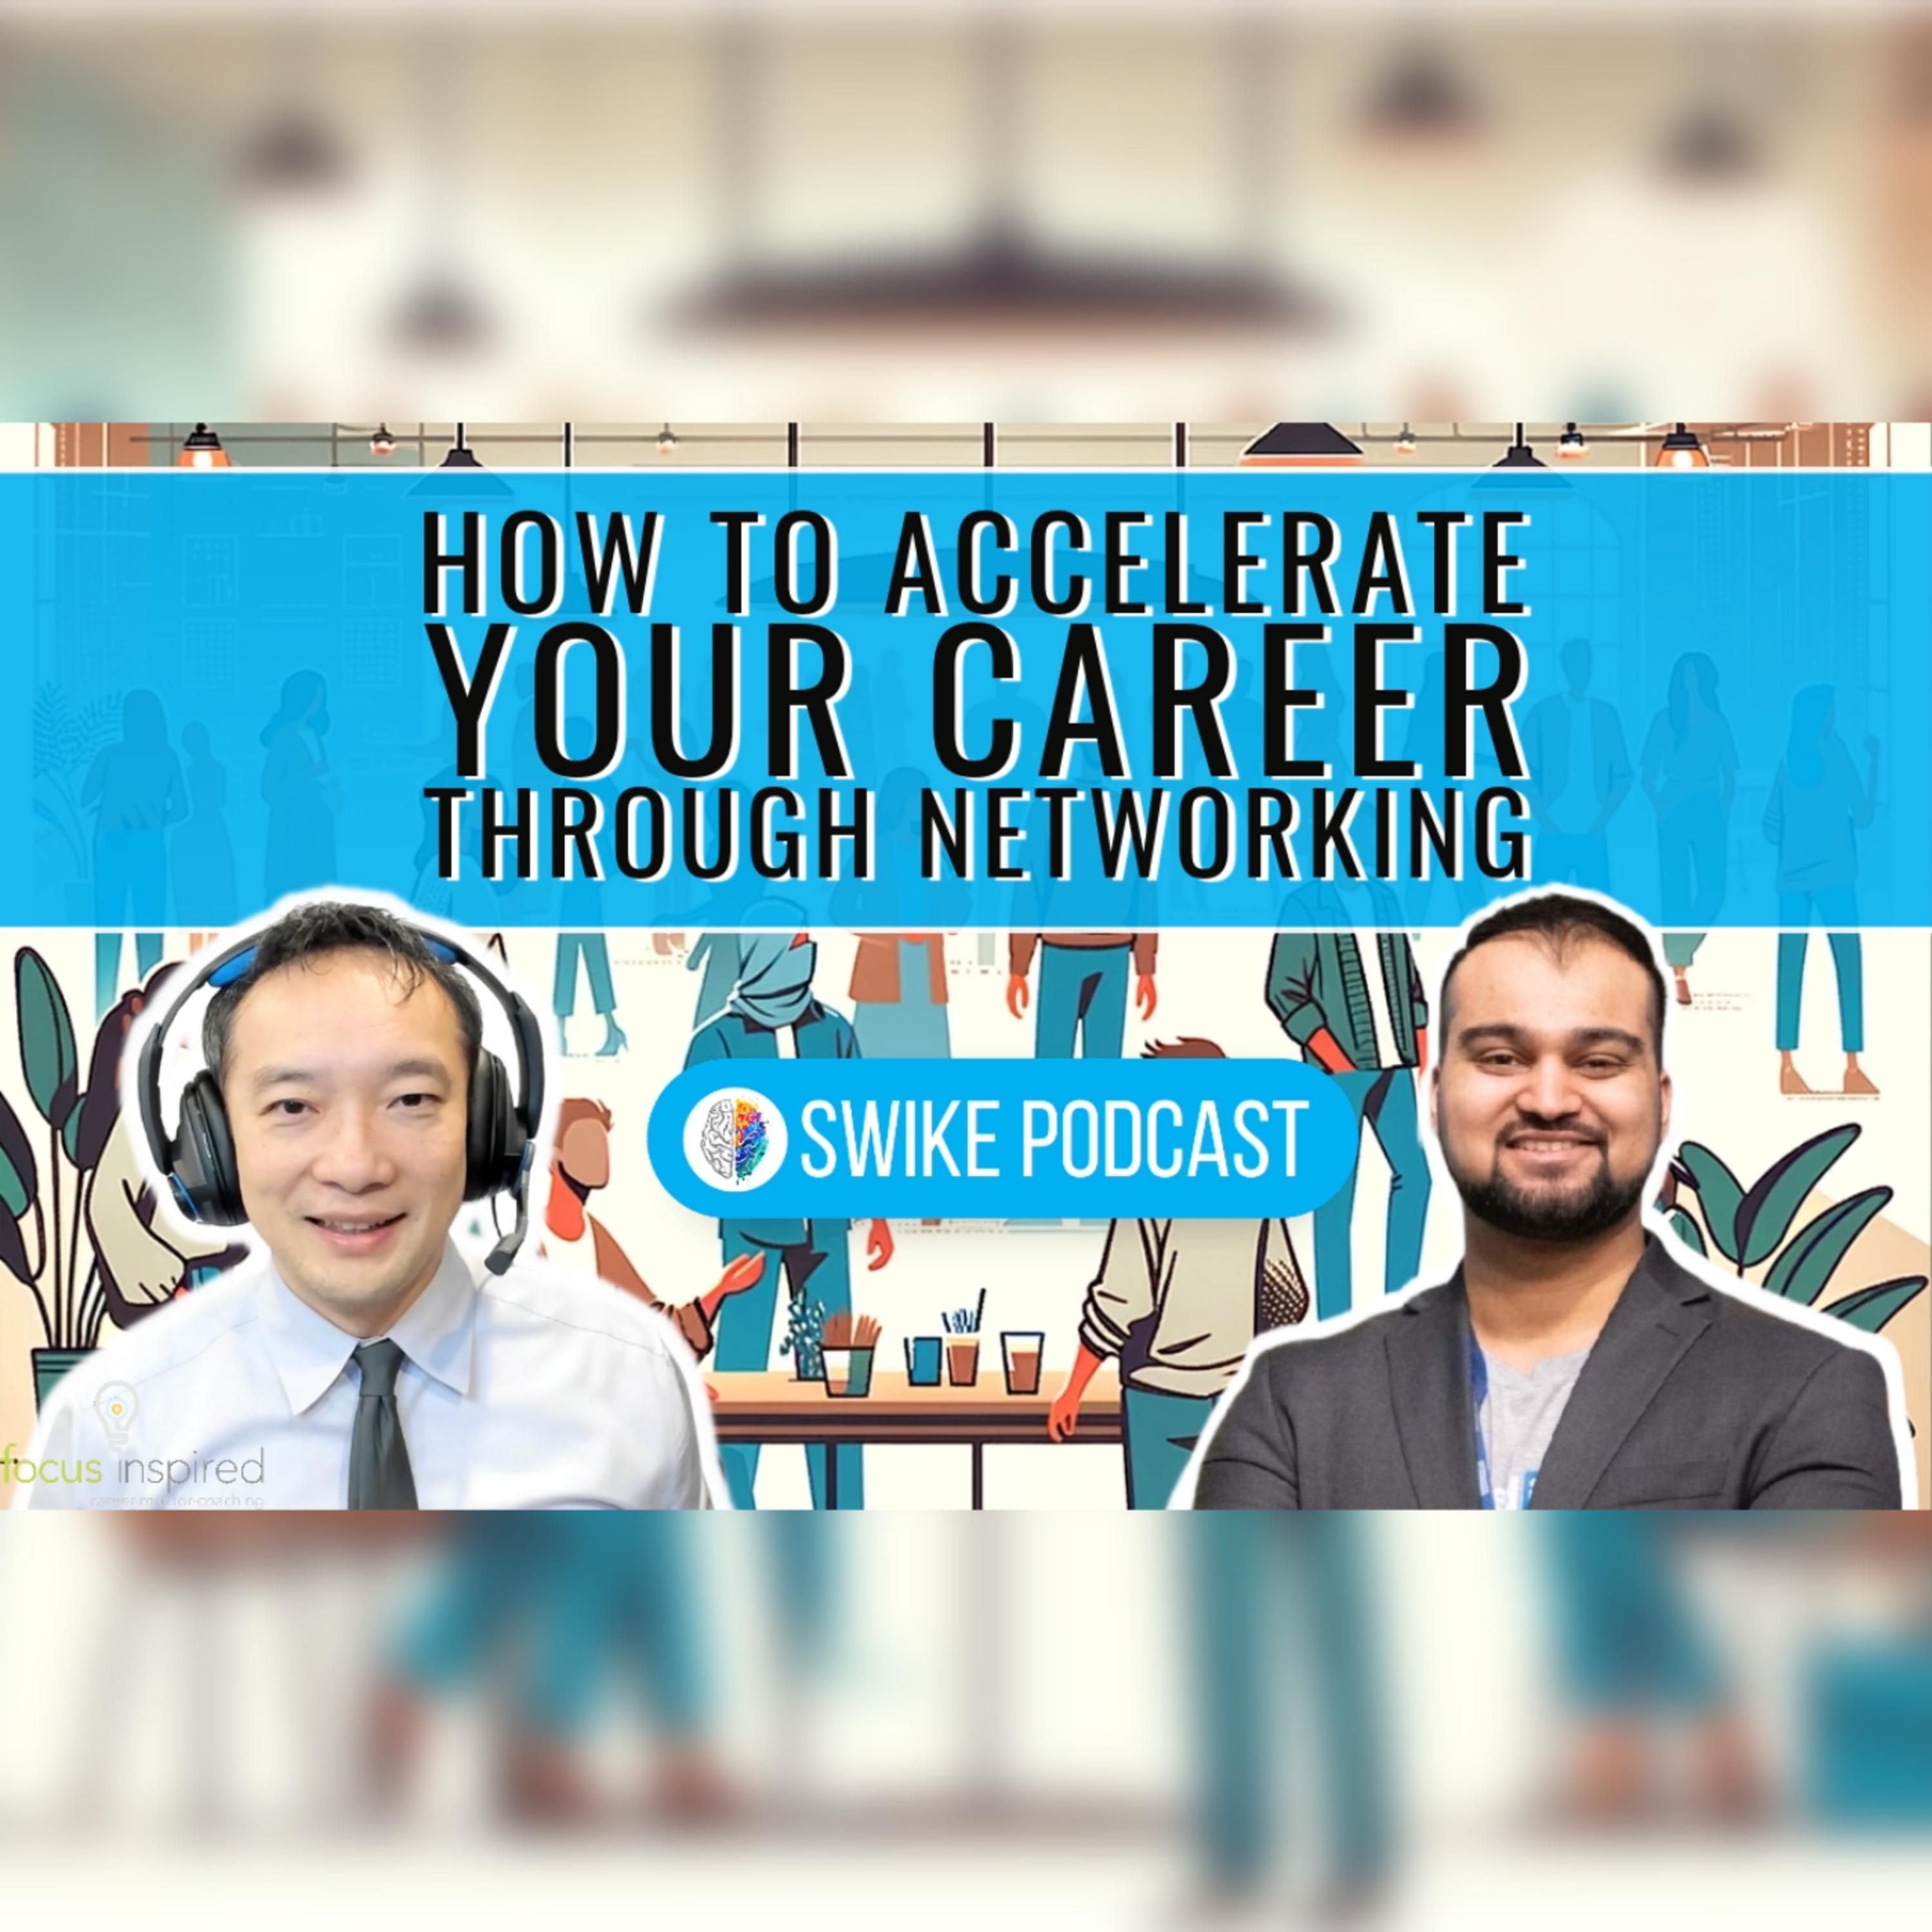 How to accelerate your career through networking